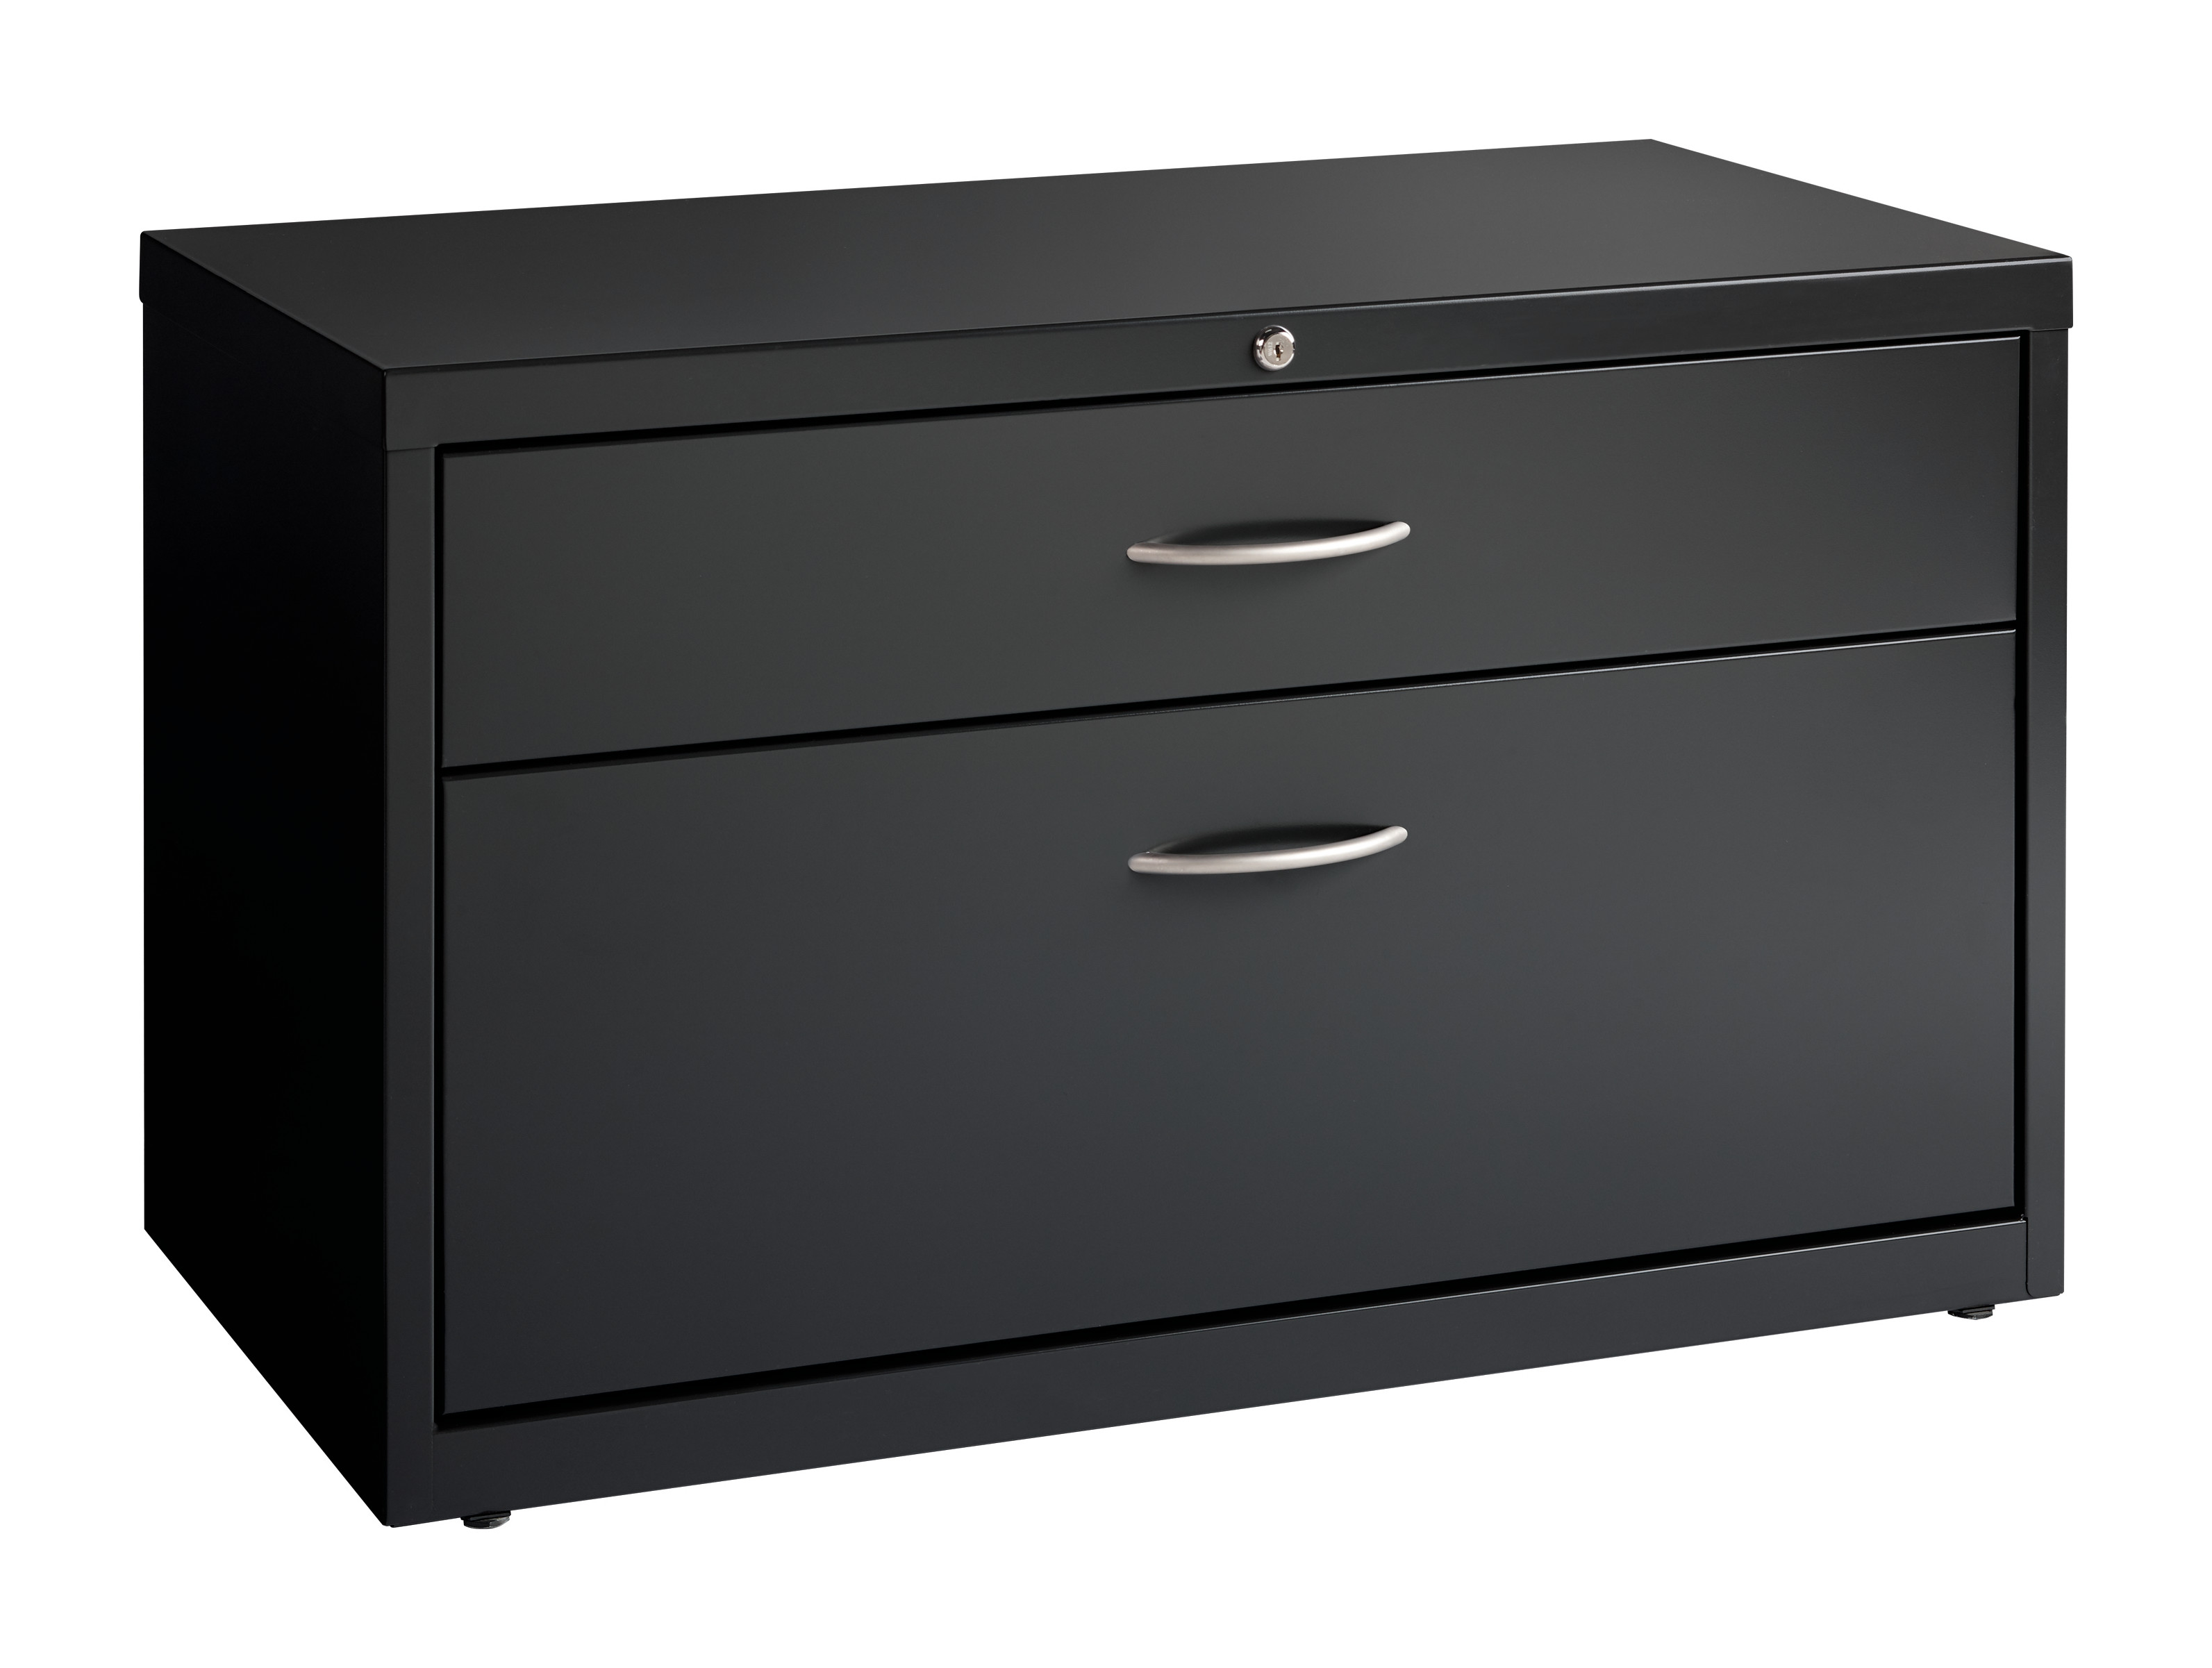 Hirsh Industries B2248135 36 in. Low Credenza with Box & File Drawers - Charcoal - image 1 of 13